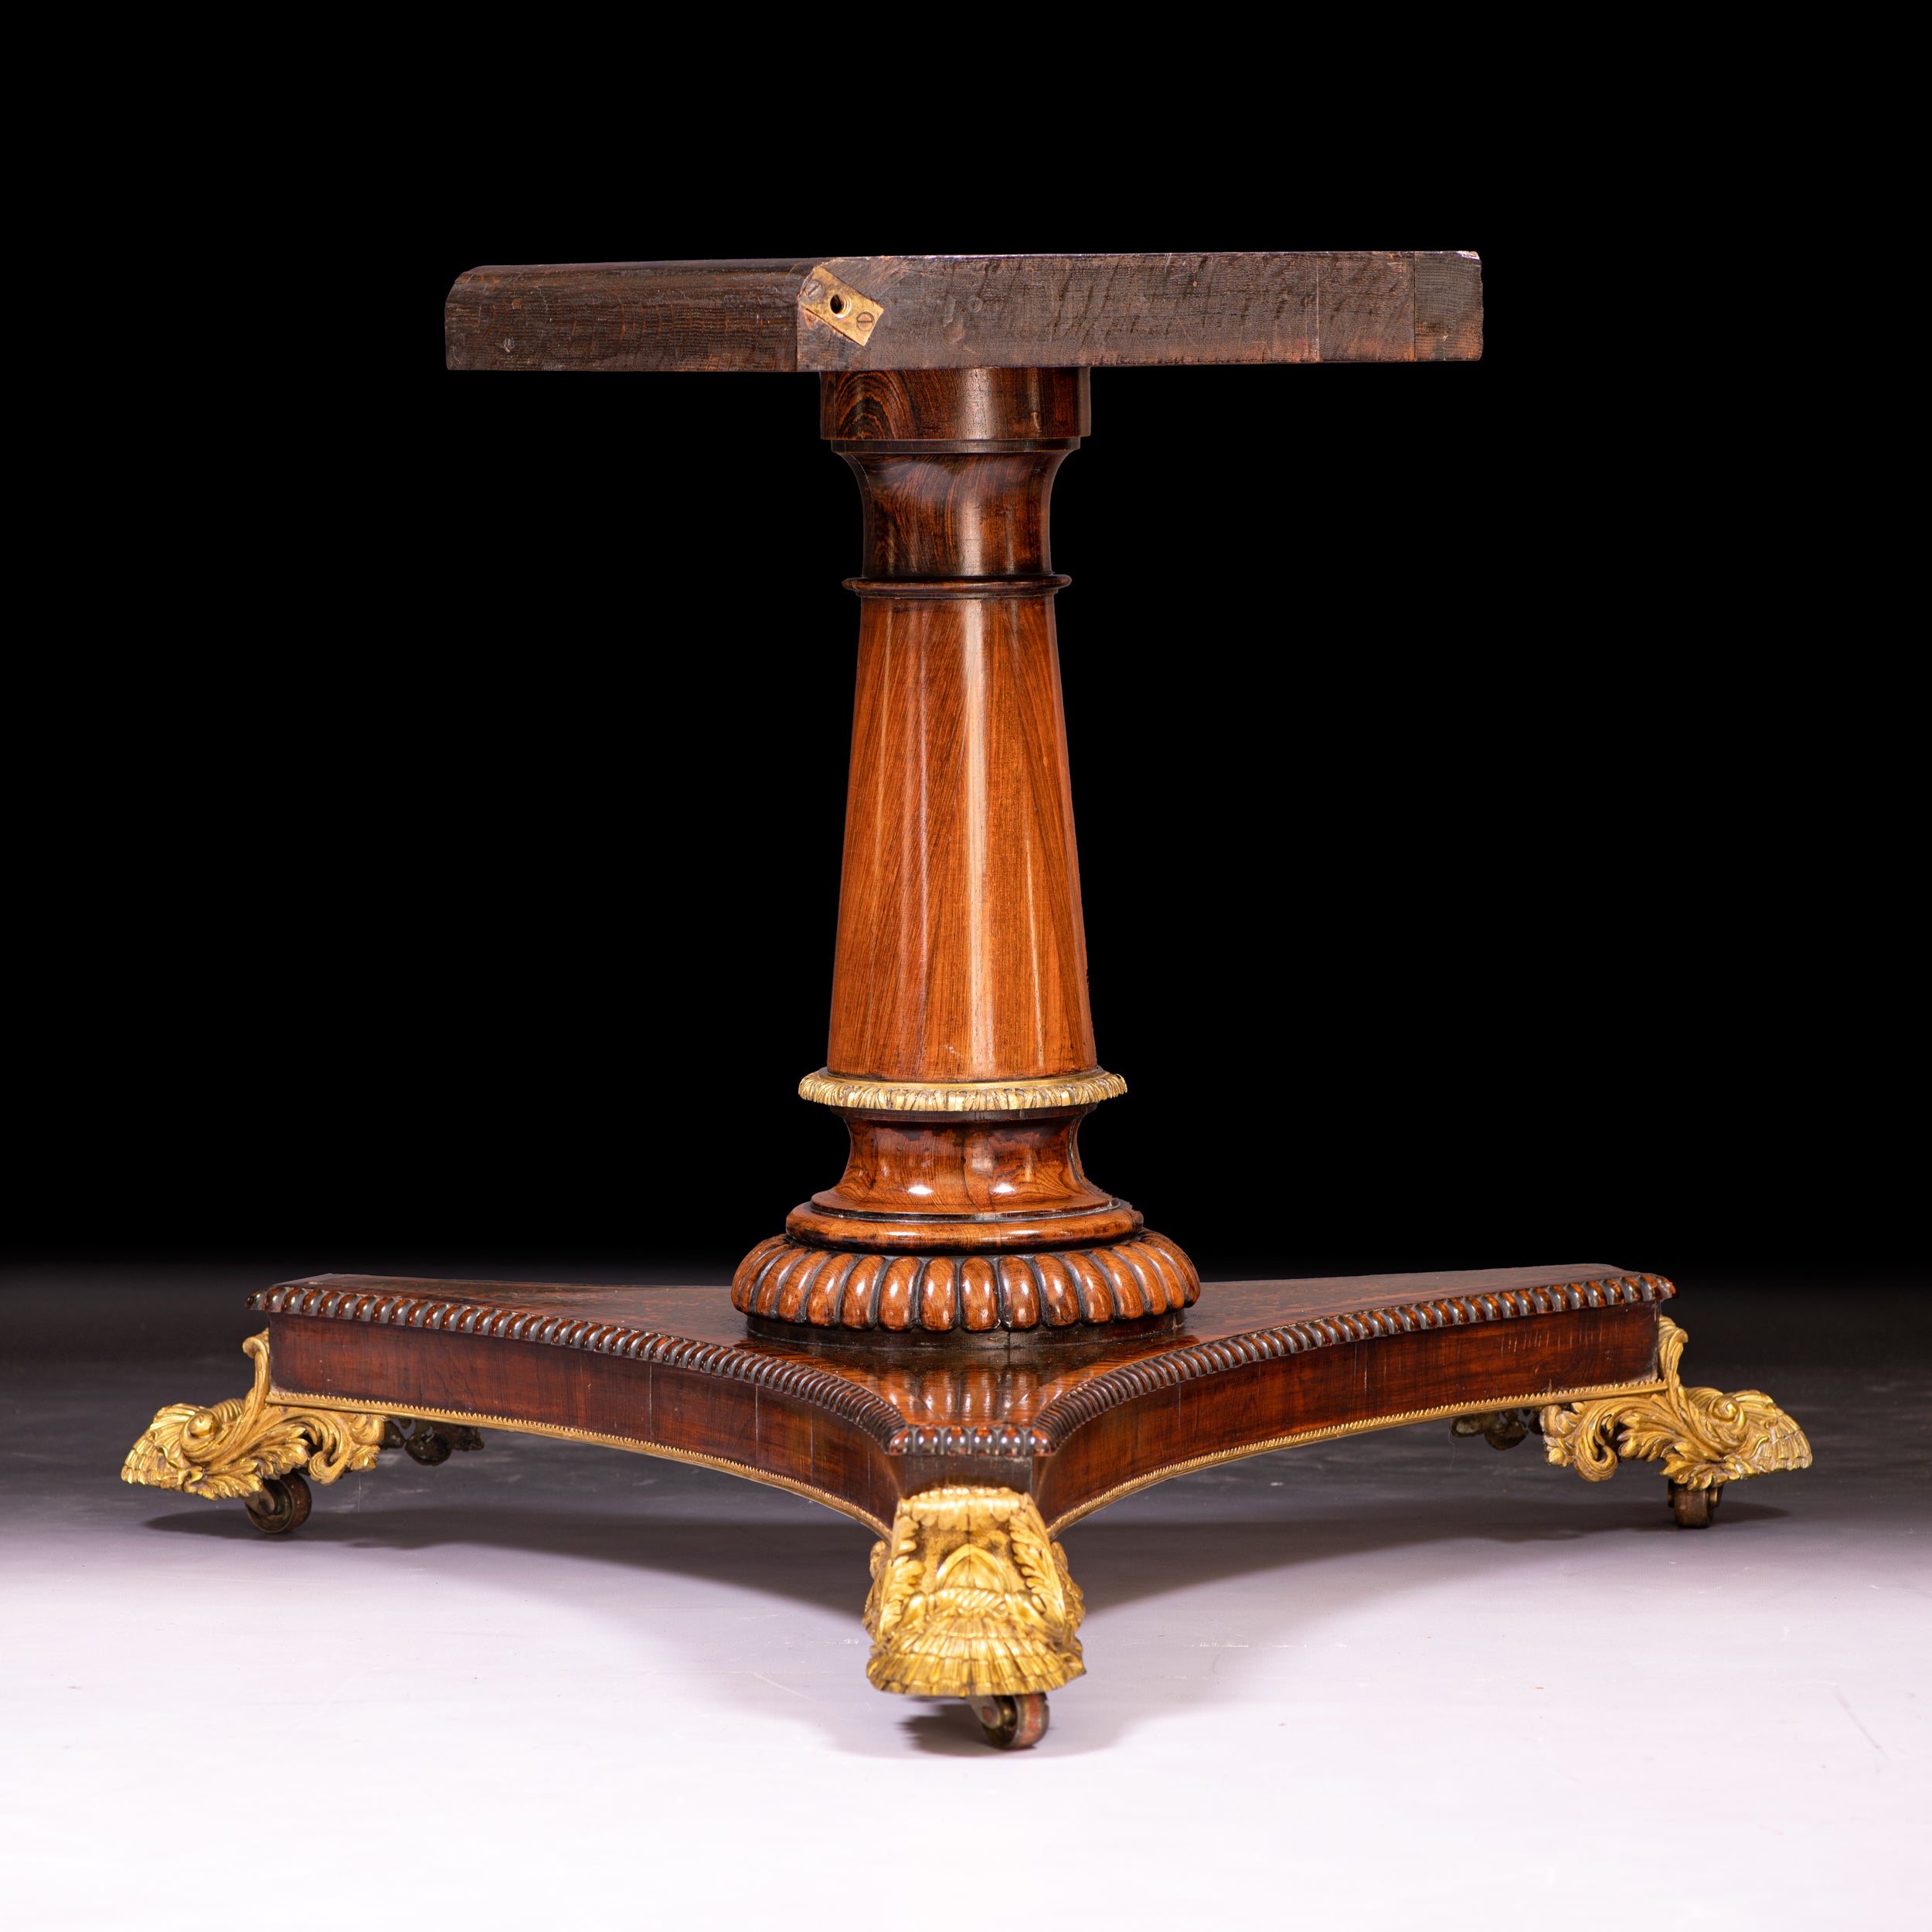 ENGLISH REGENCY BRASS INLAID CENTRE TABLE - REF No. 7068